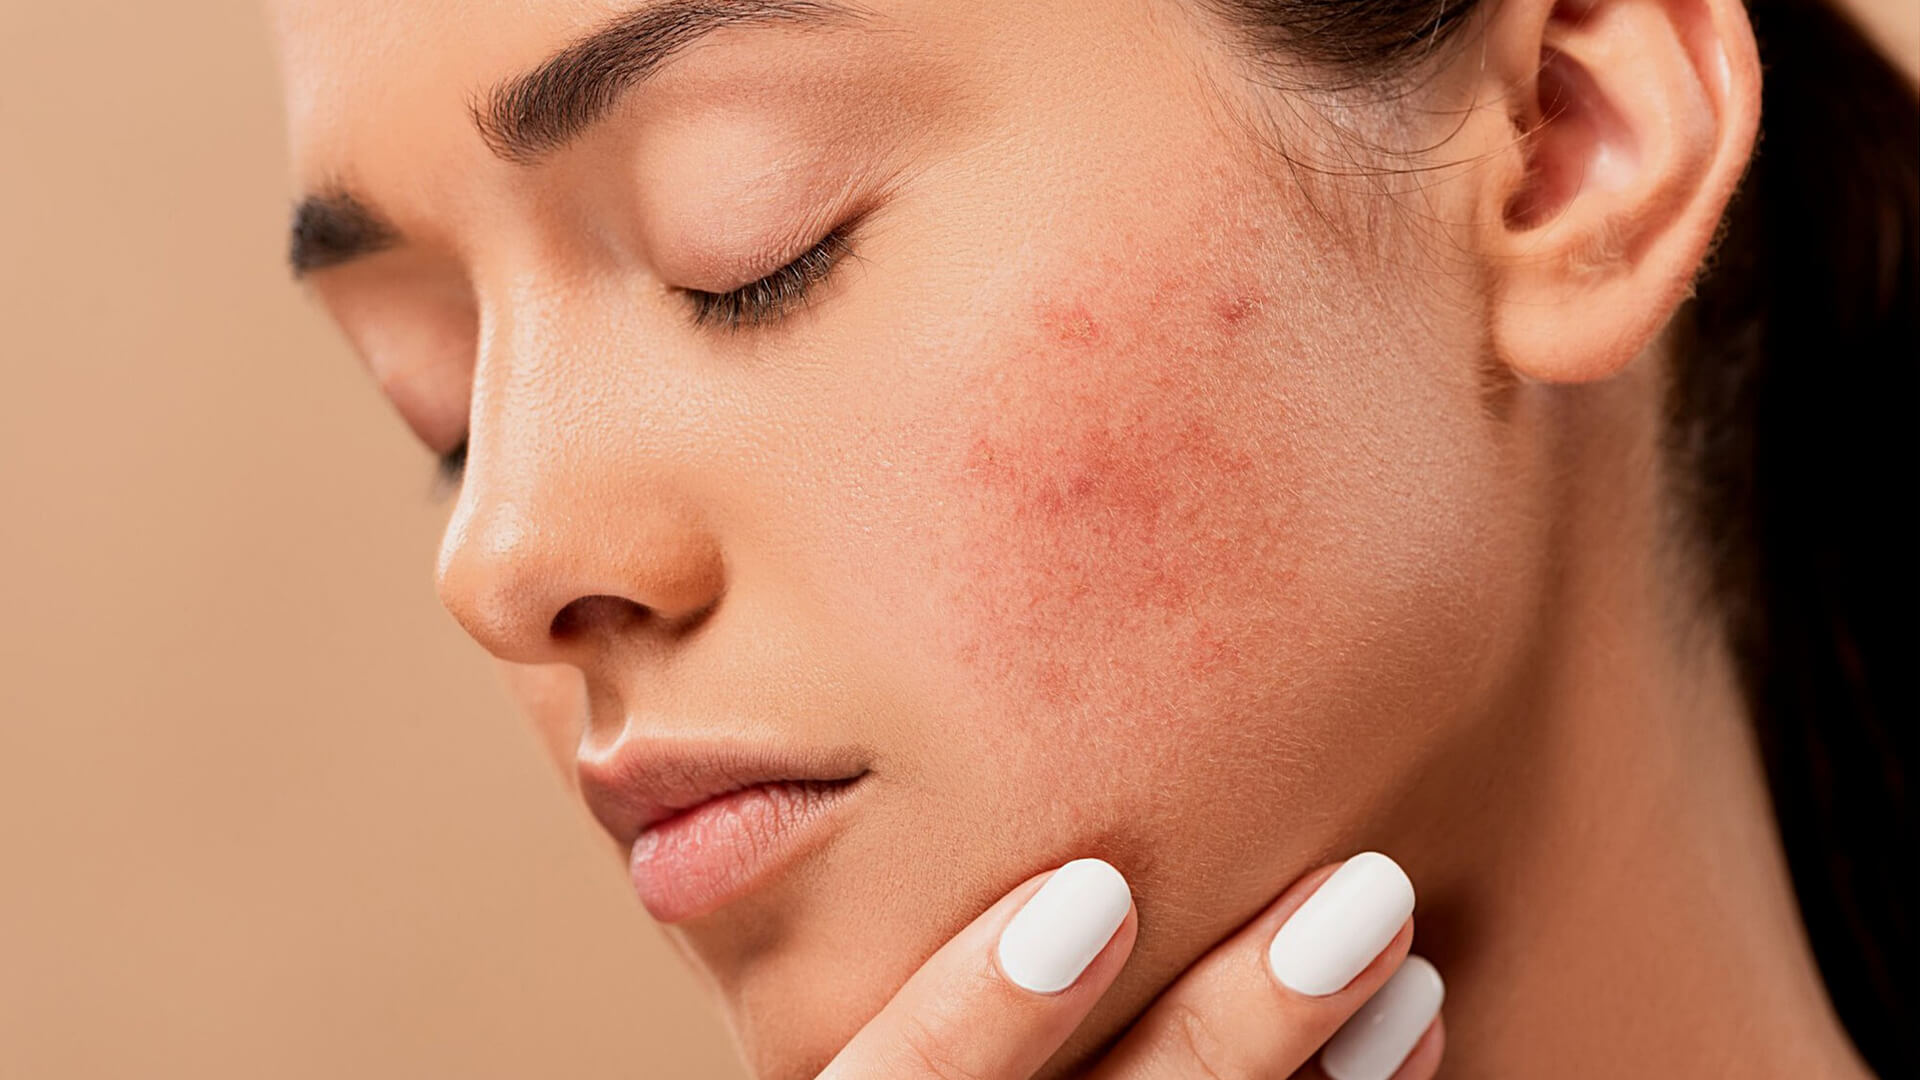 Rosacea Skincare Tips That Are Proven Effective